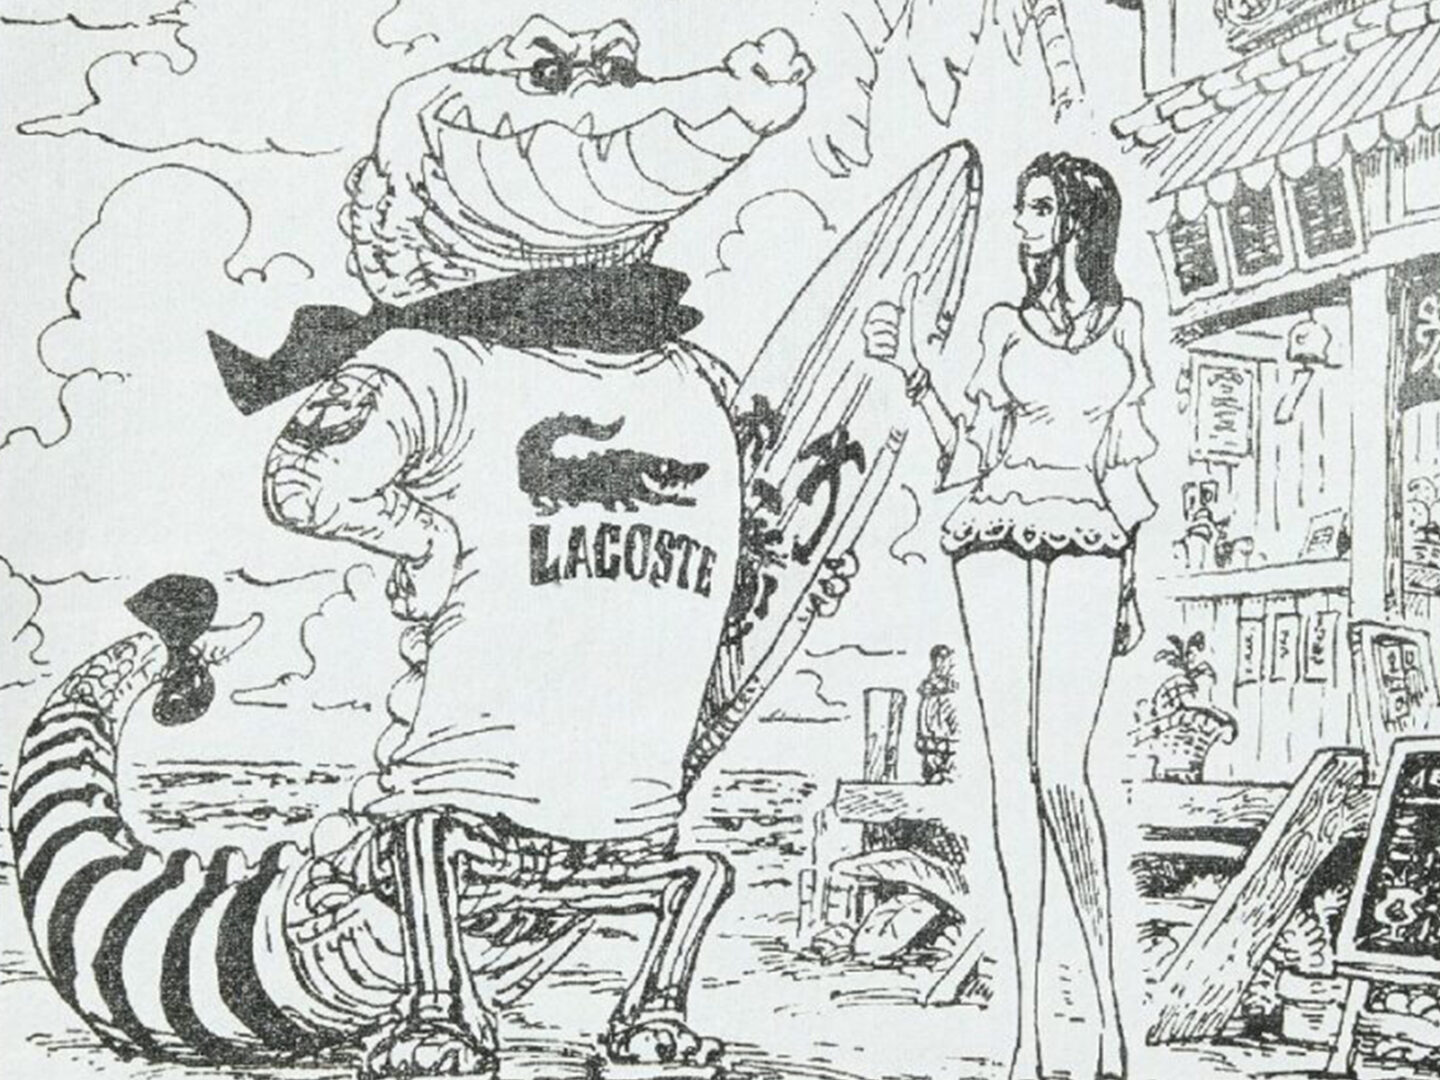 Lacoste pays tribute to ‘One Piece’